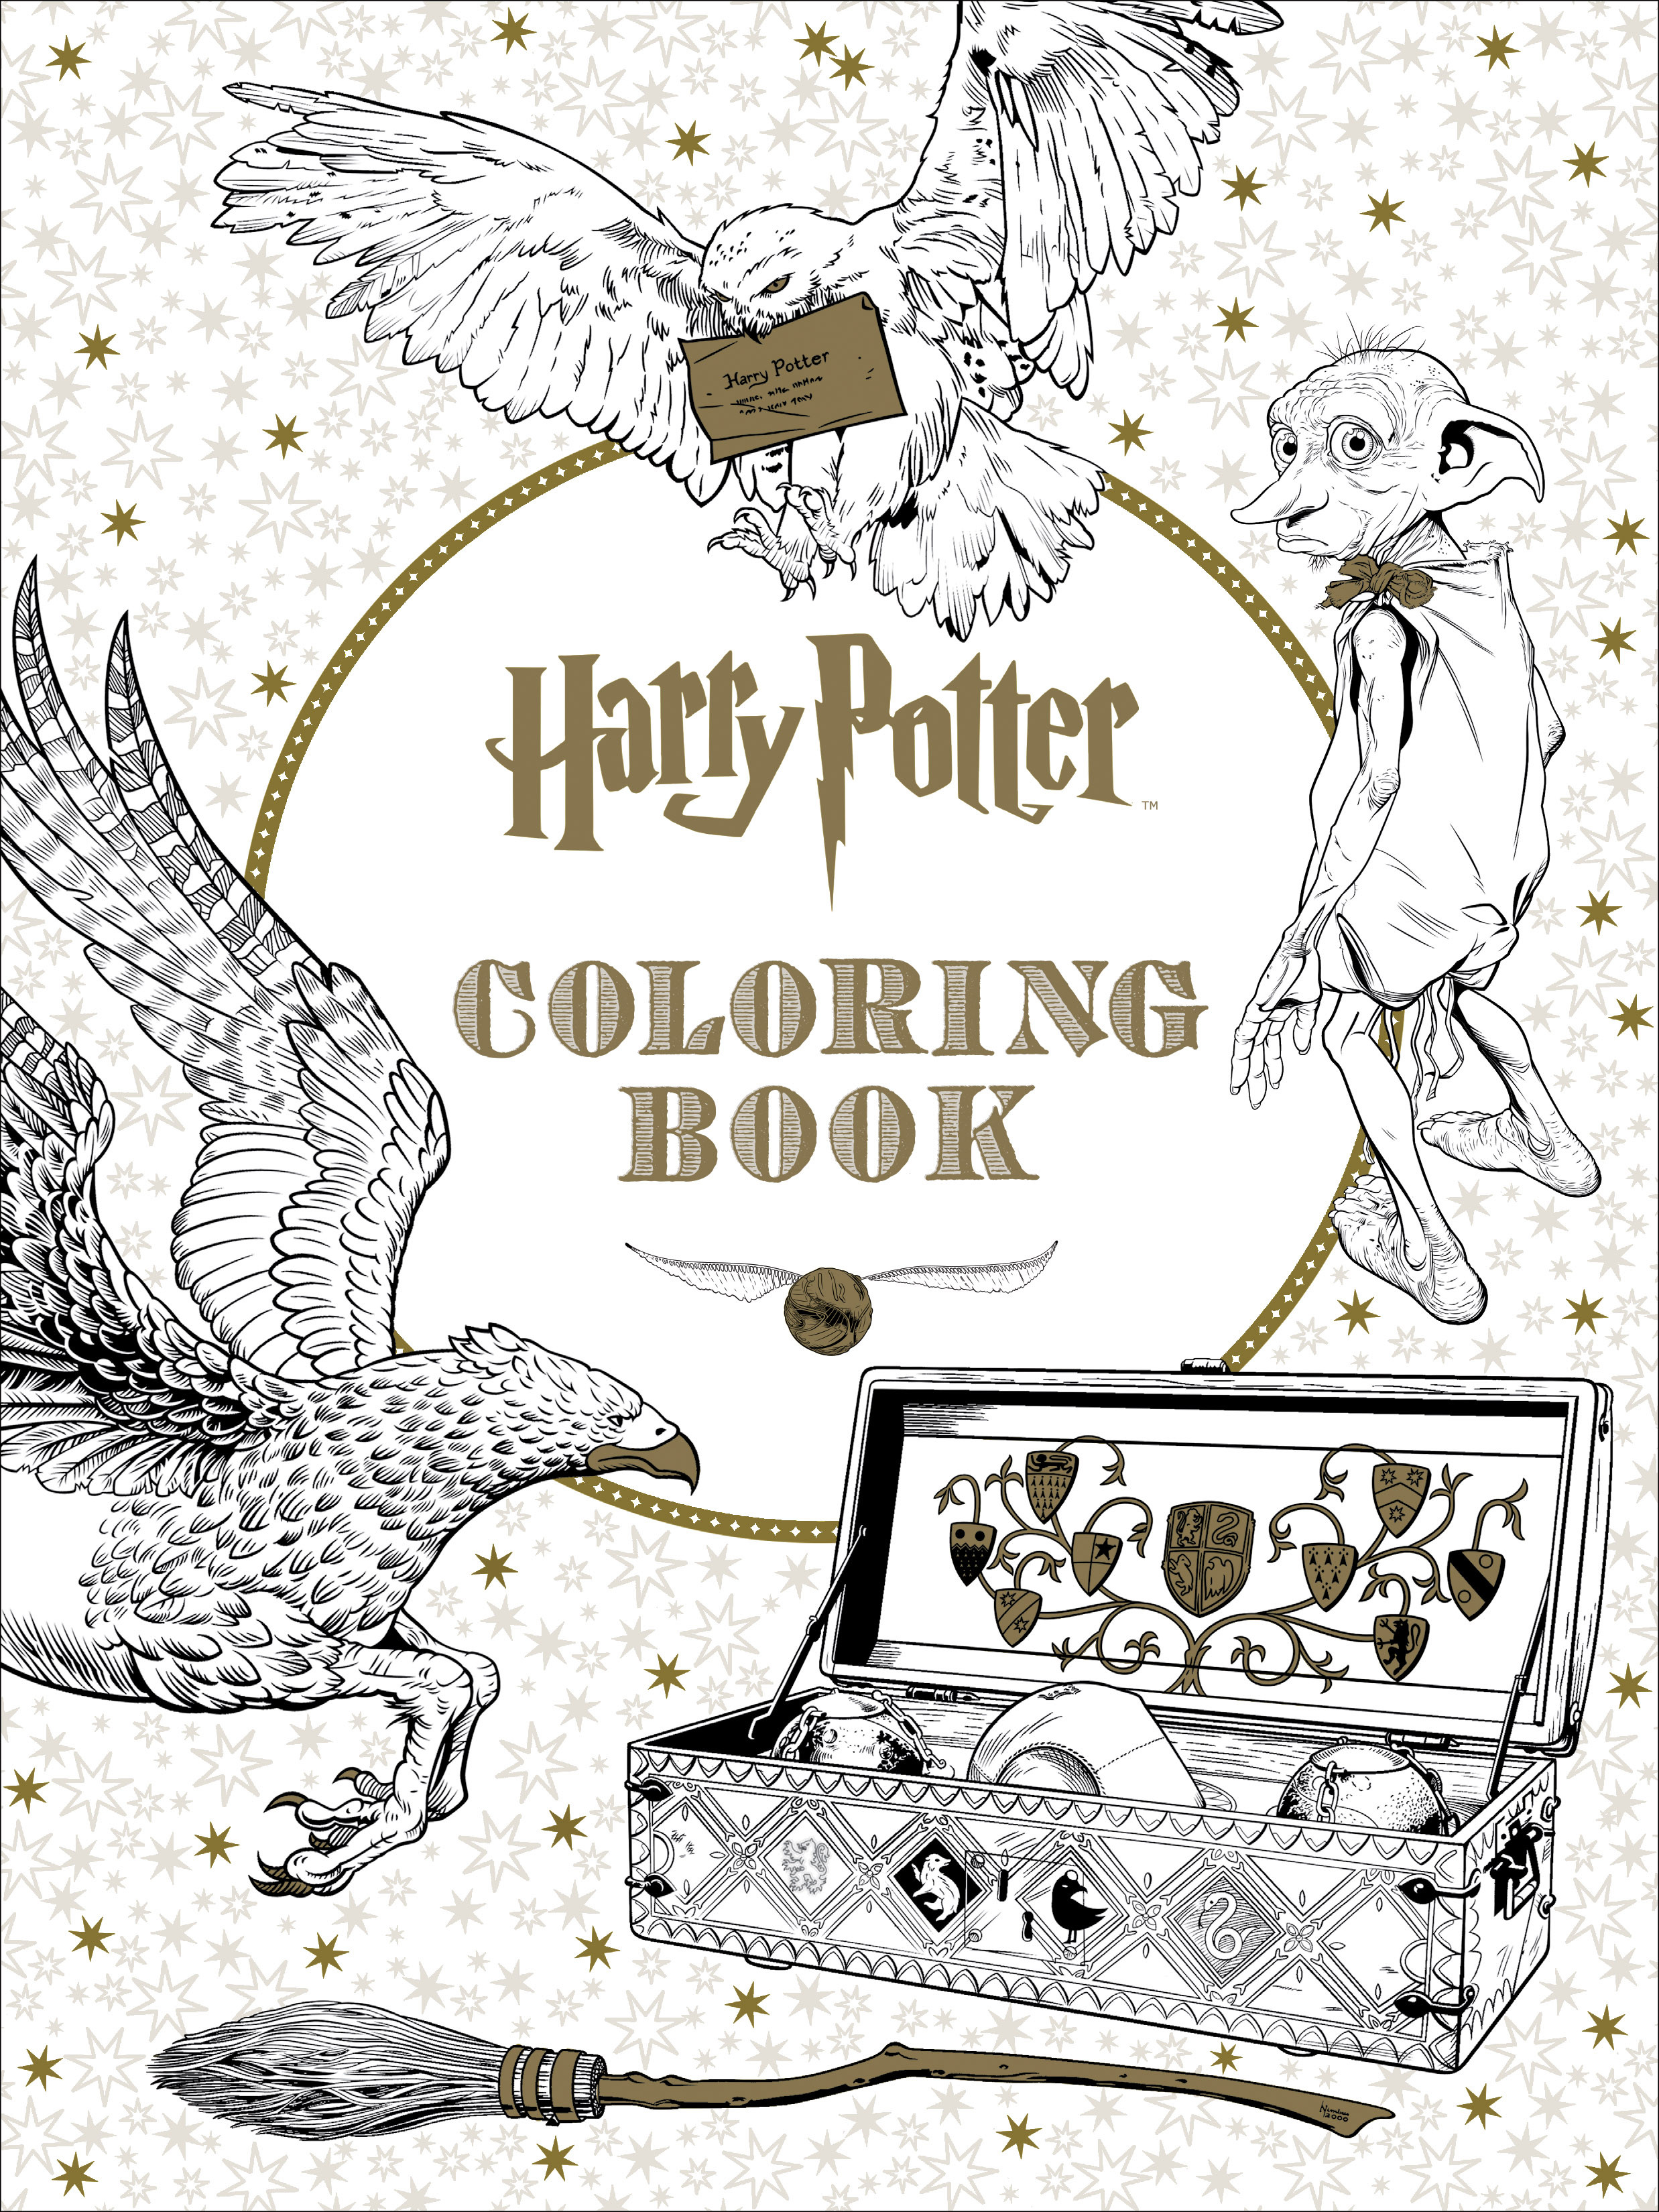 Harry Potter Coloring Book
 Why You Need Adult Coloring Books in Your Life